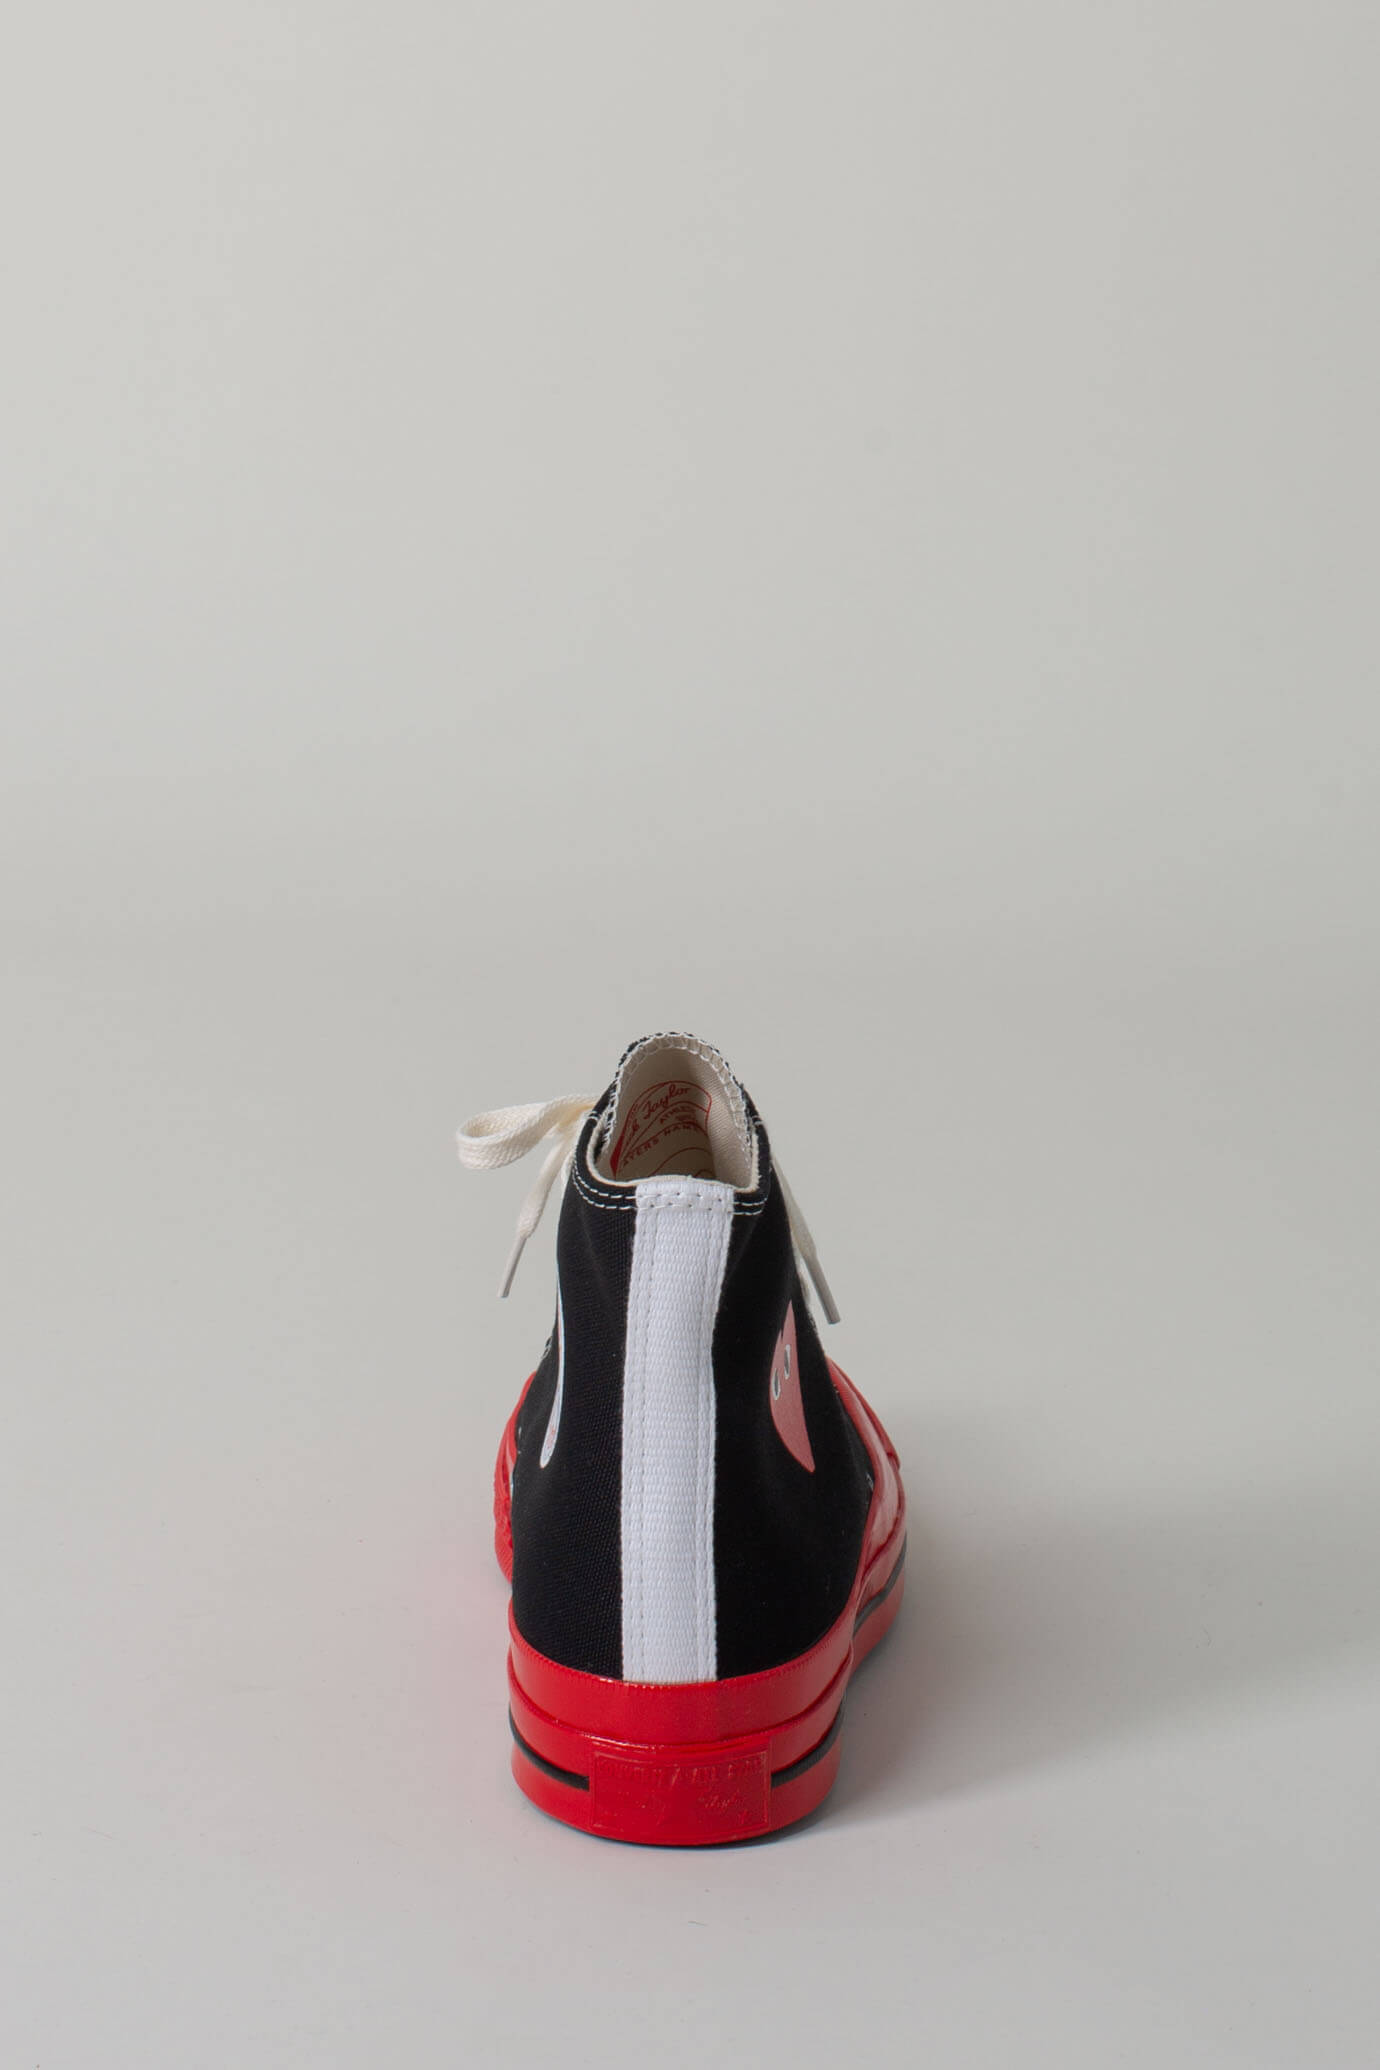 Converse CDG Play High Red Sole